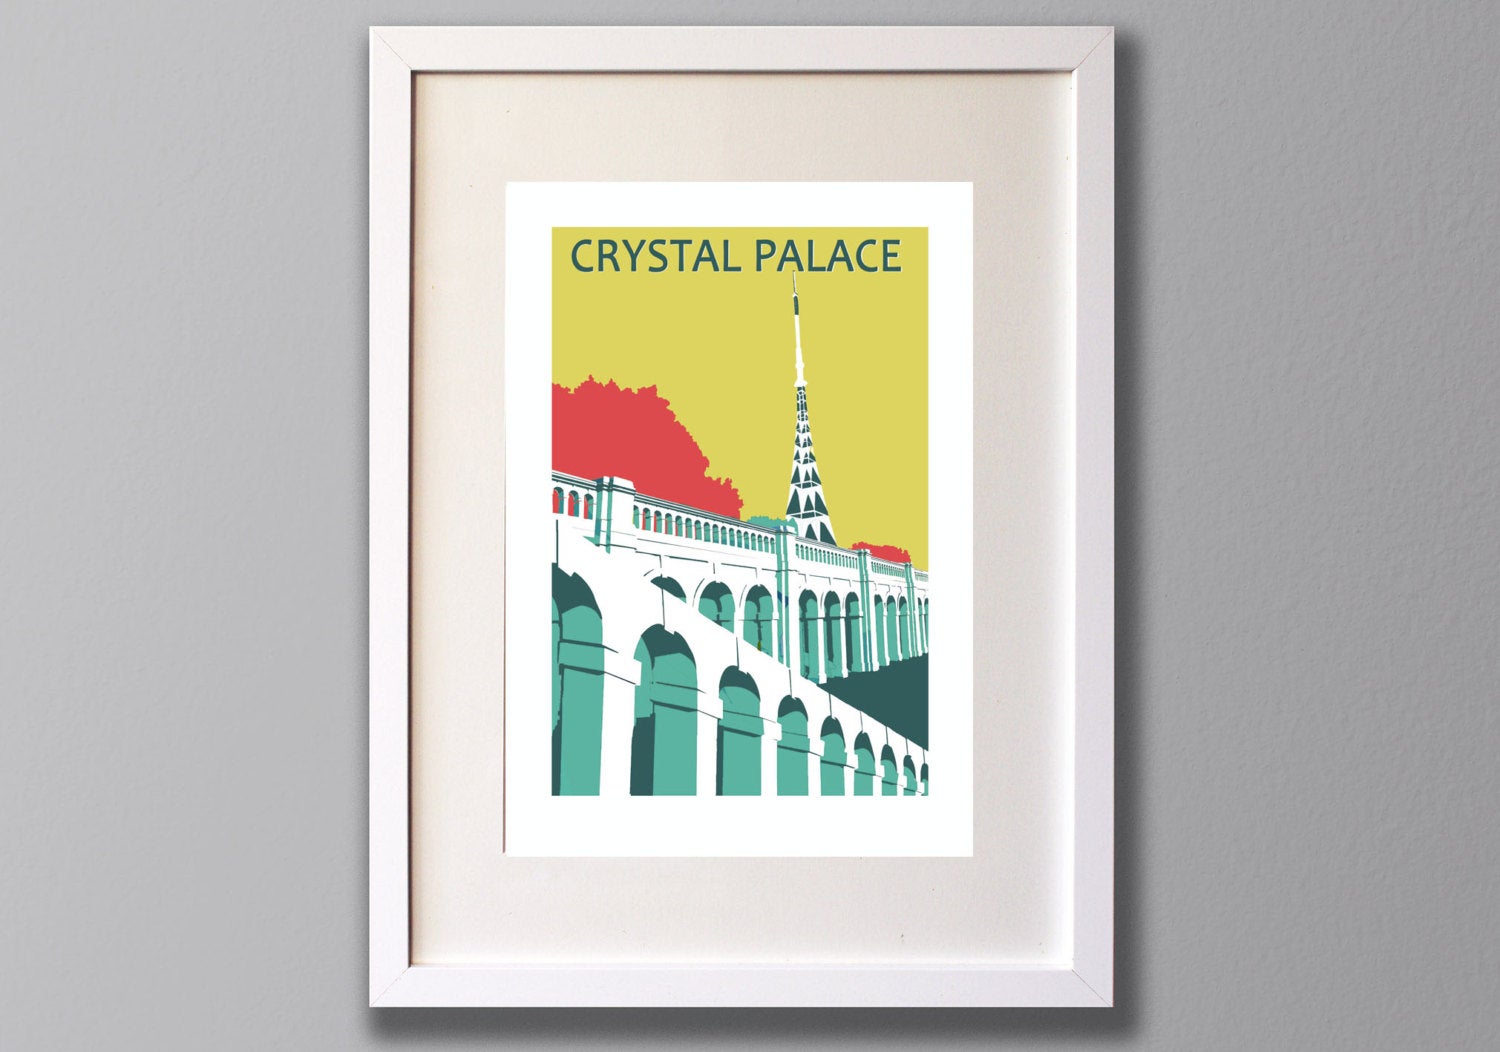 Crystal Palace Park Transmitter Screen Print, Limited Edition A3, London - Red Faces Prints